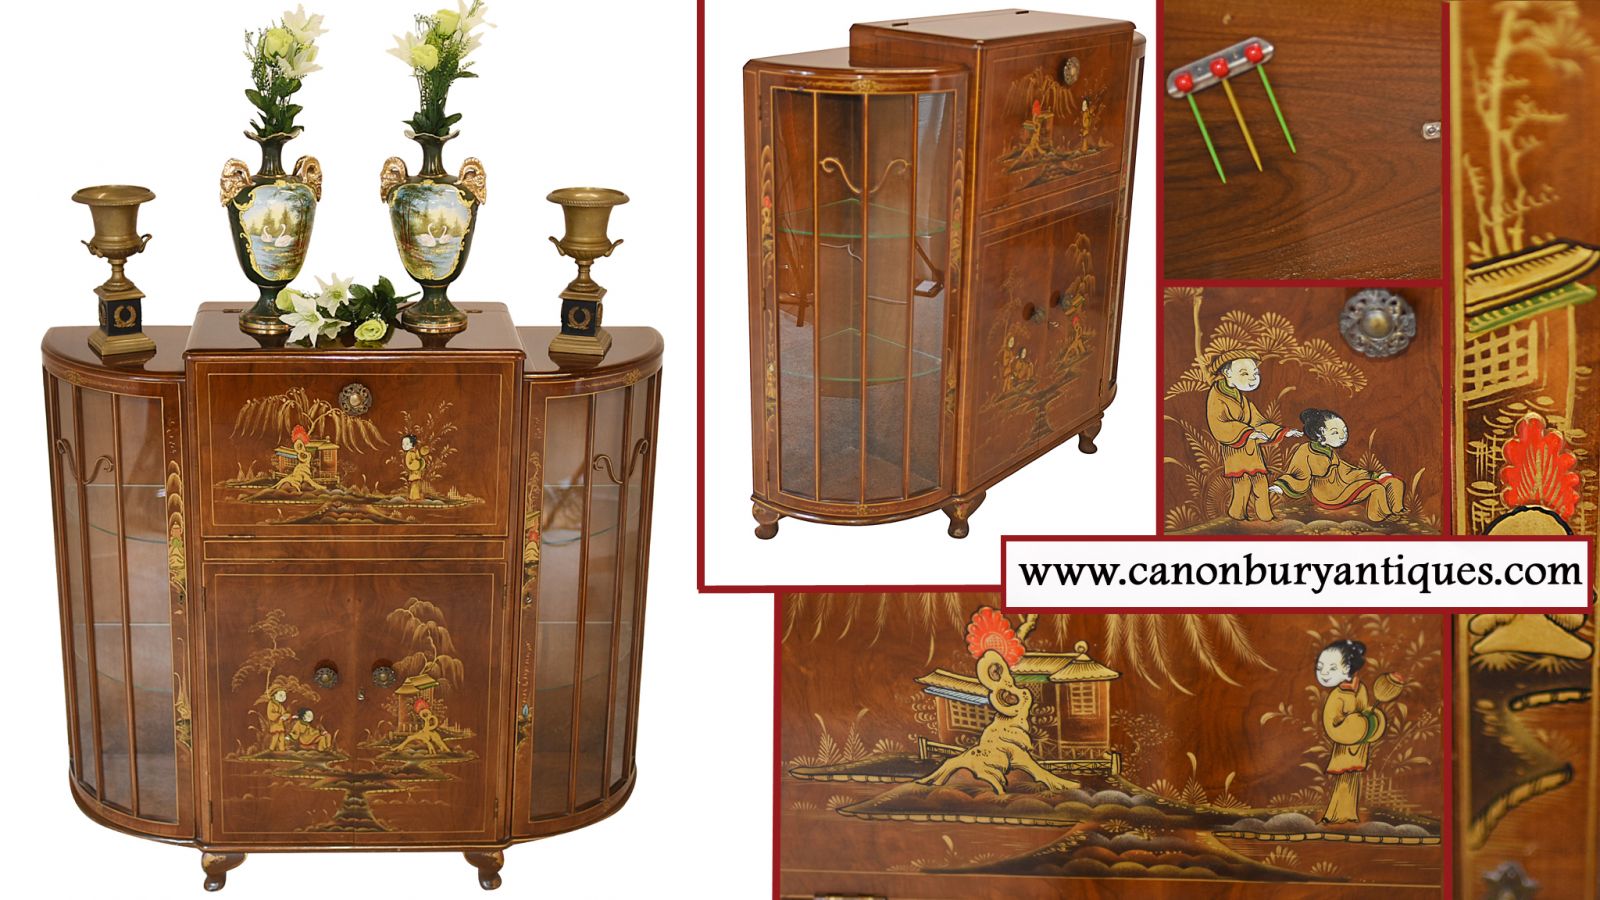 Art deco drinks cabinet with Chinoiserie